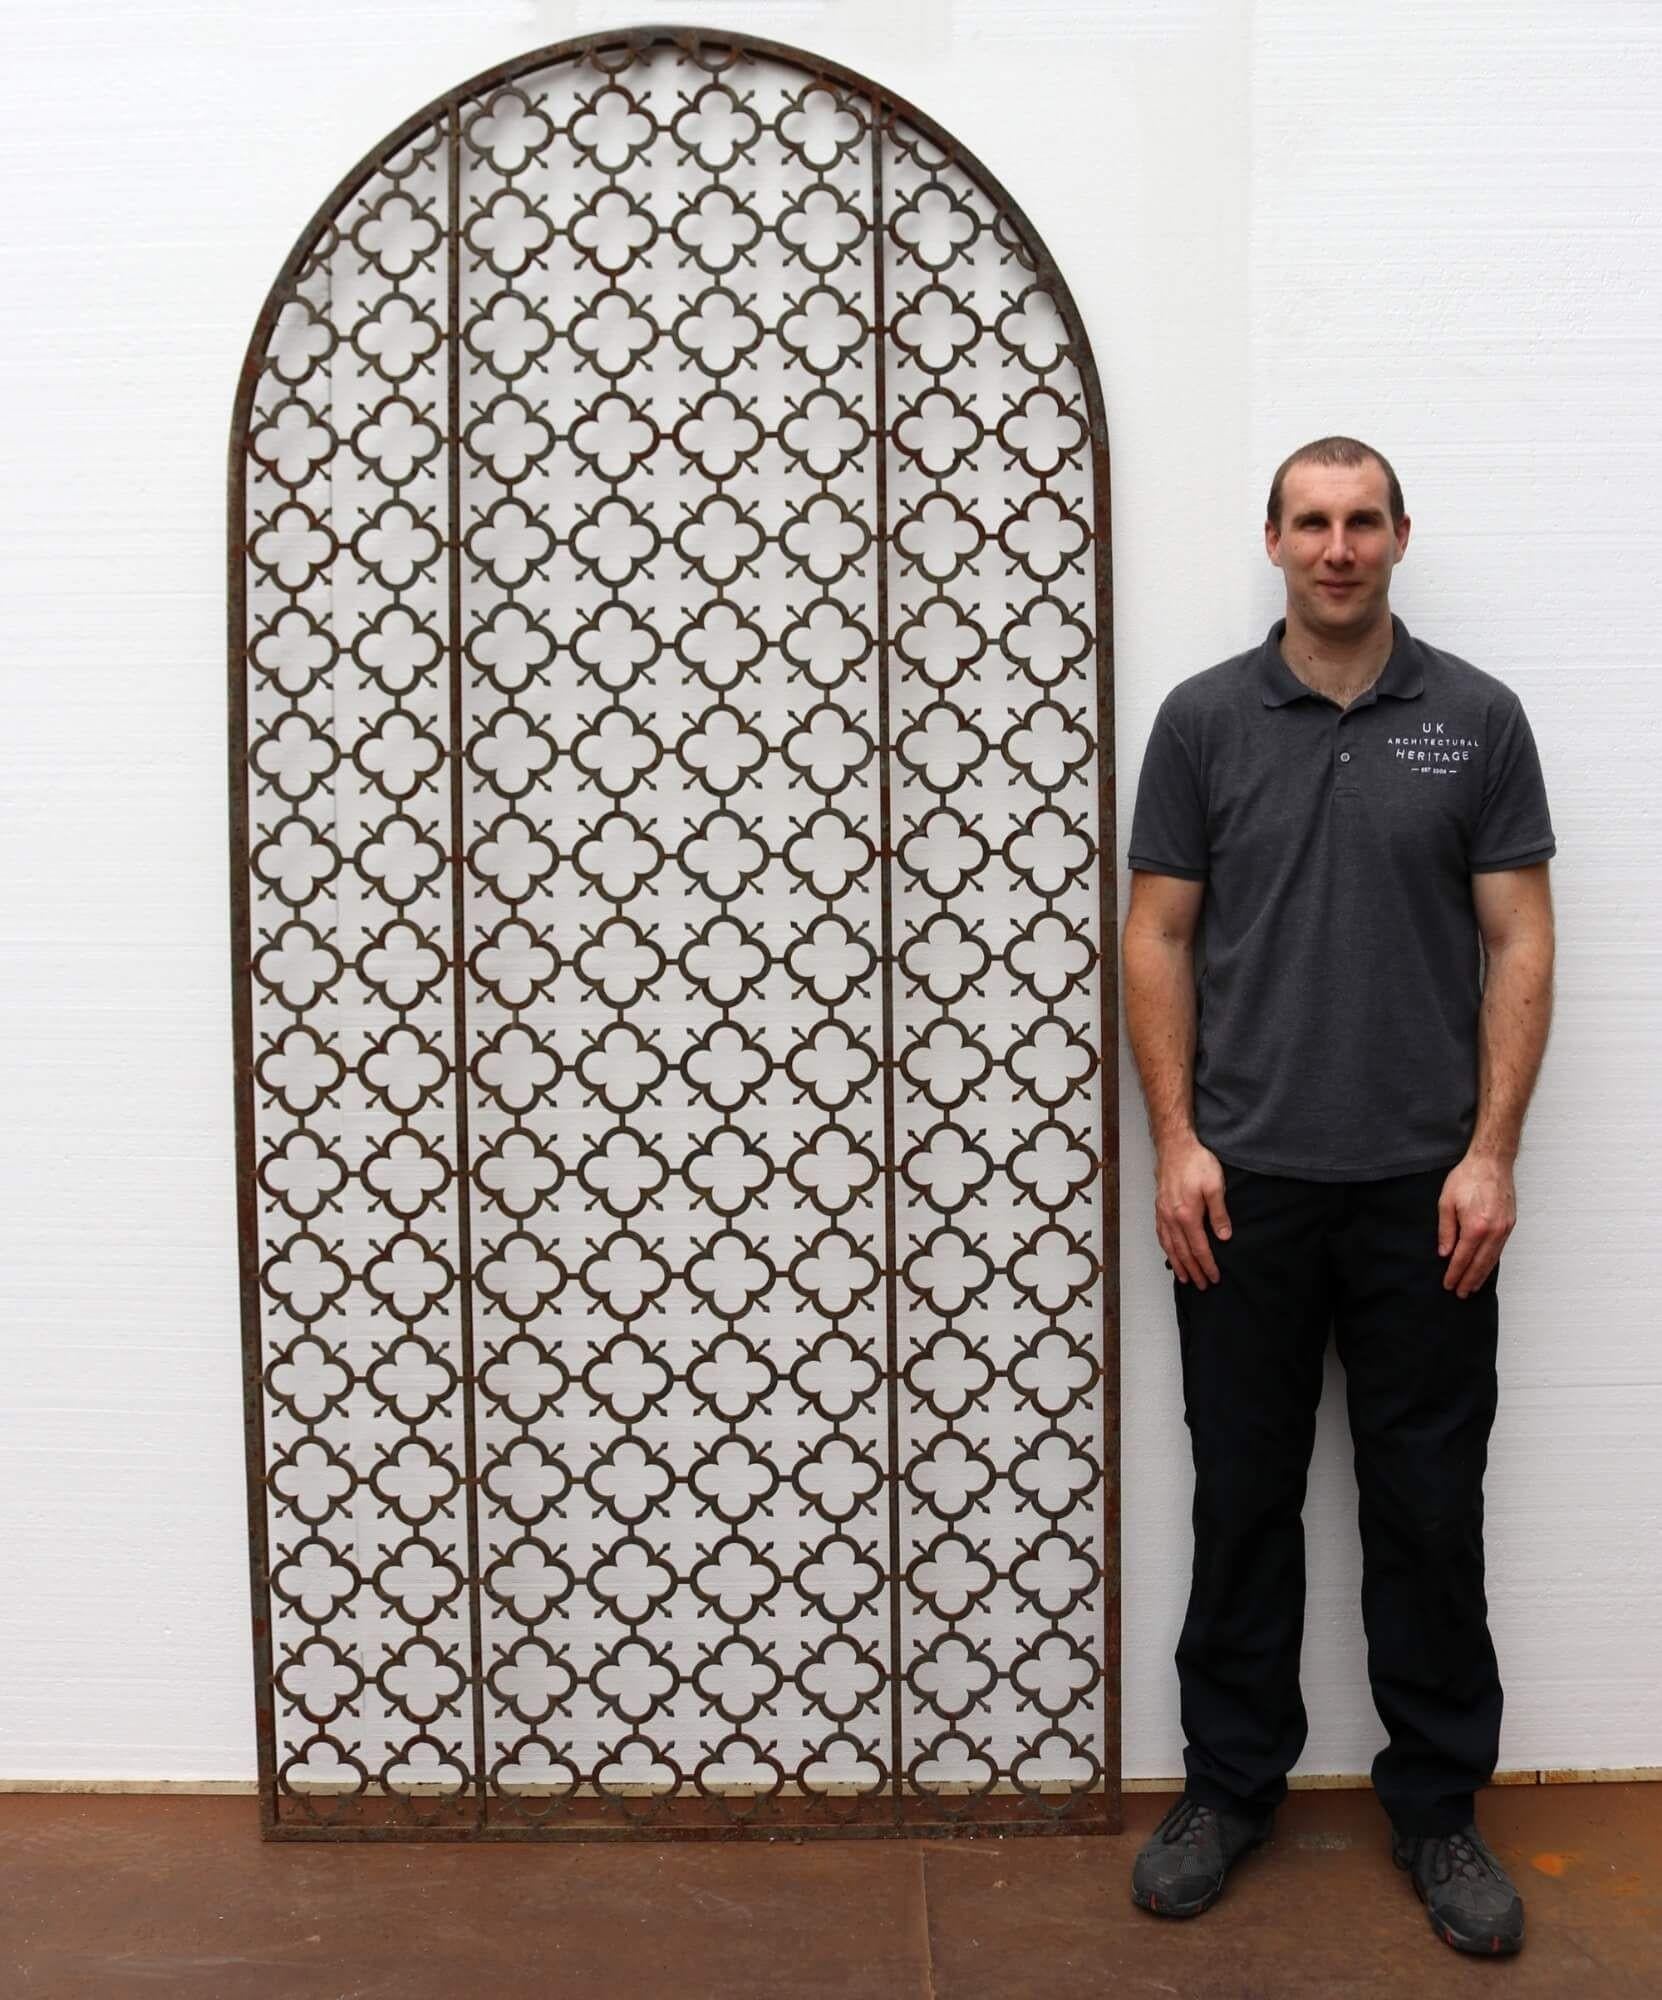 A pair of large arched metal panels, crafted in steel with a repeated quatrefoil pattern. This striking pair could be used as fixed panels within a garden scheme as decorative garden trellis panels or metal garden screens, making a distinguished